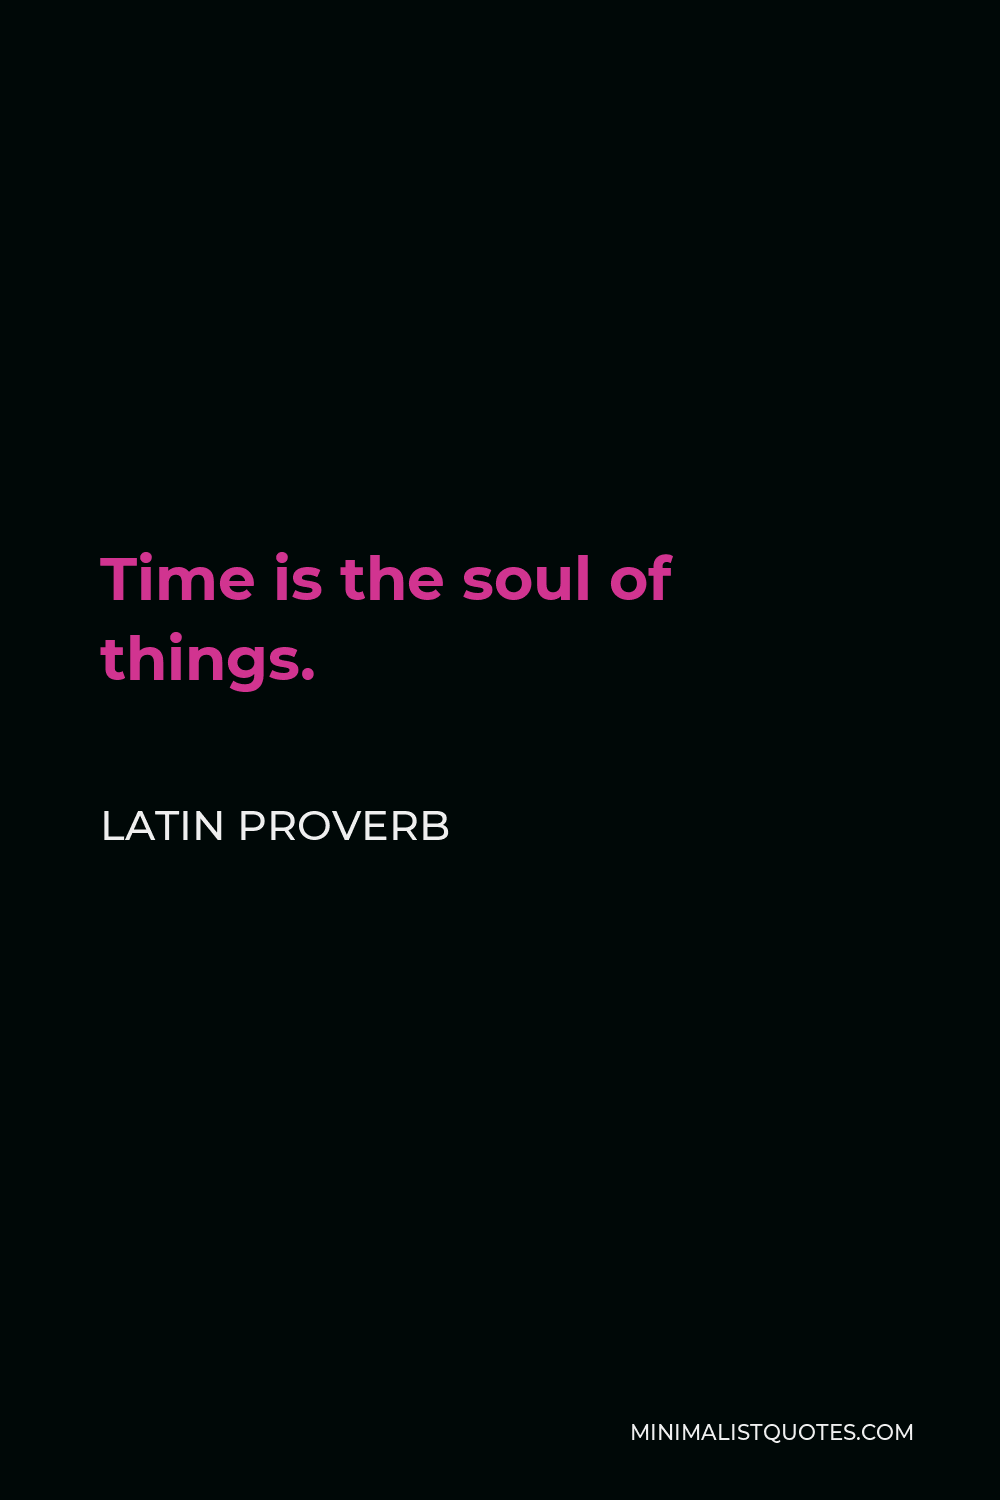 Latin Proverb Quote - Time is the soul of things.